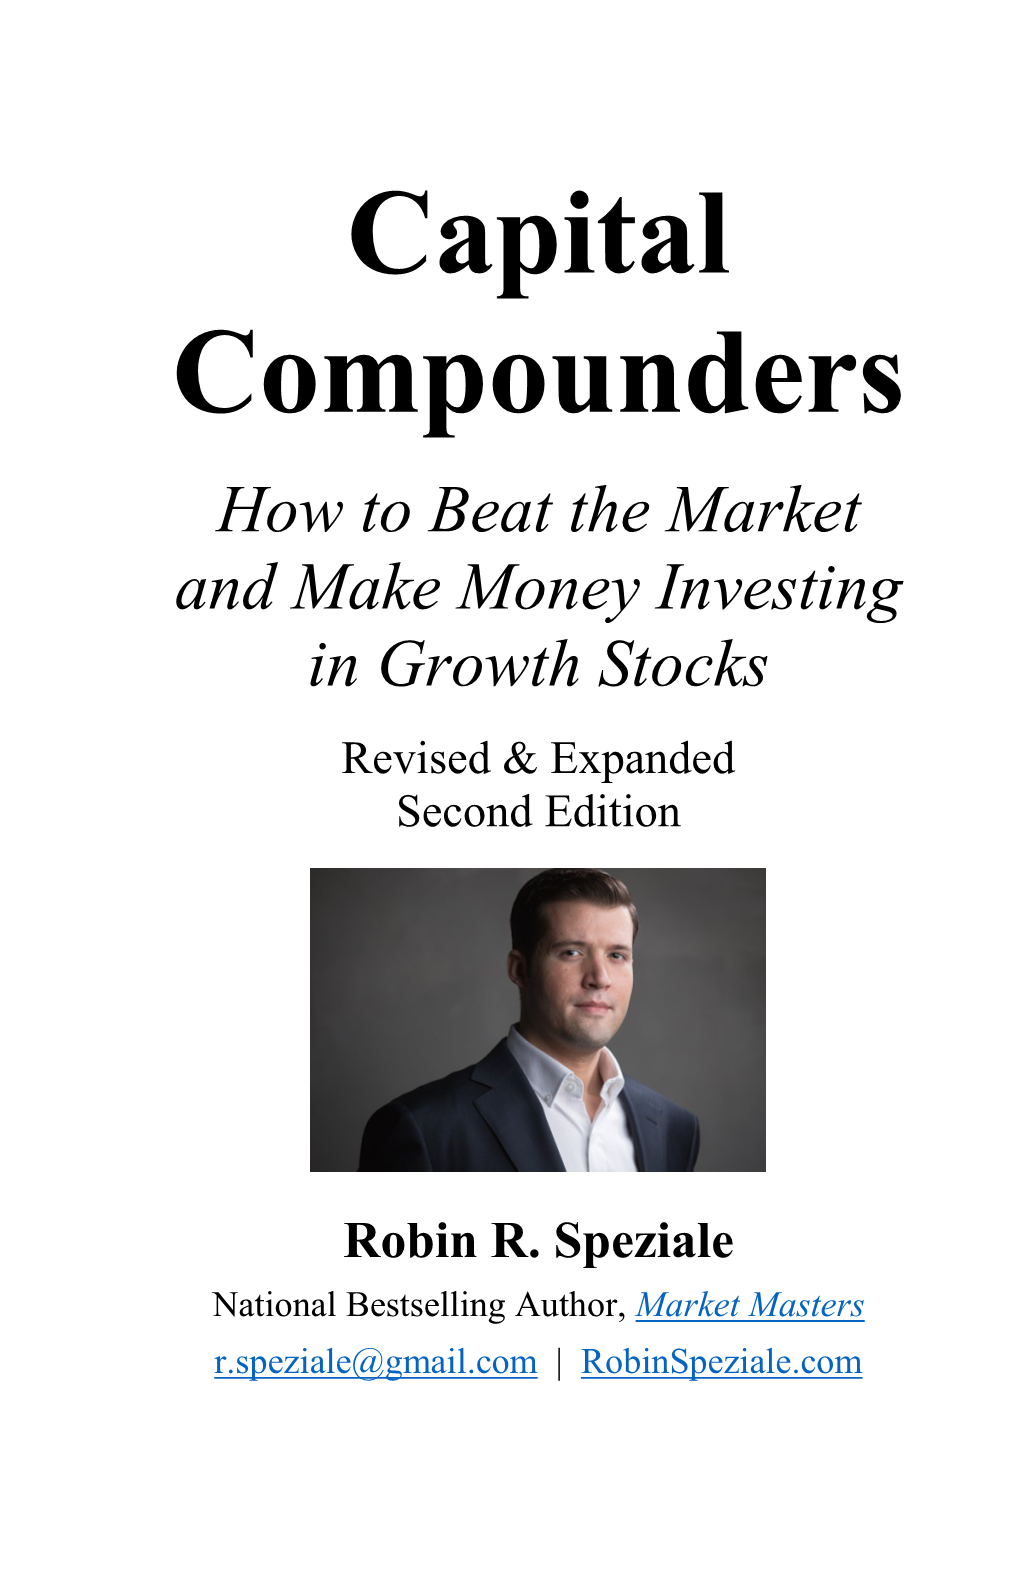 Capital Compounders How to Beat the Market and Make Money Investing in Growth Stocks Revised & Expanded Second Edition